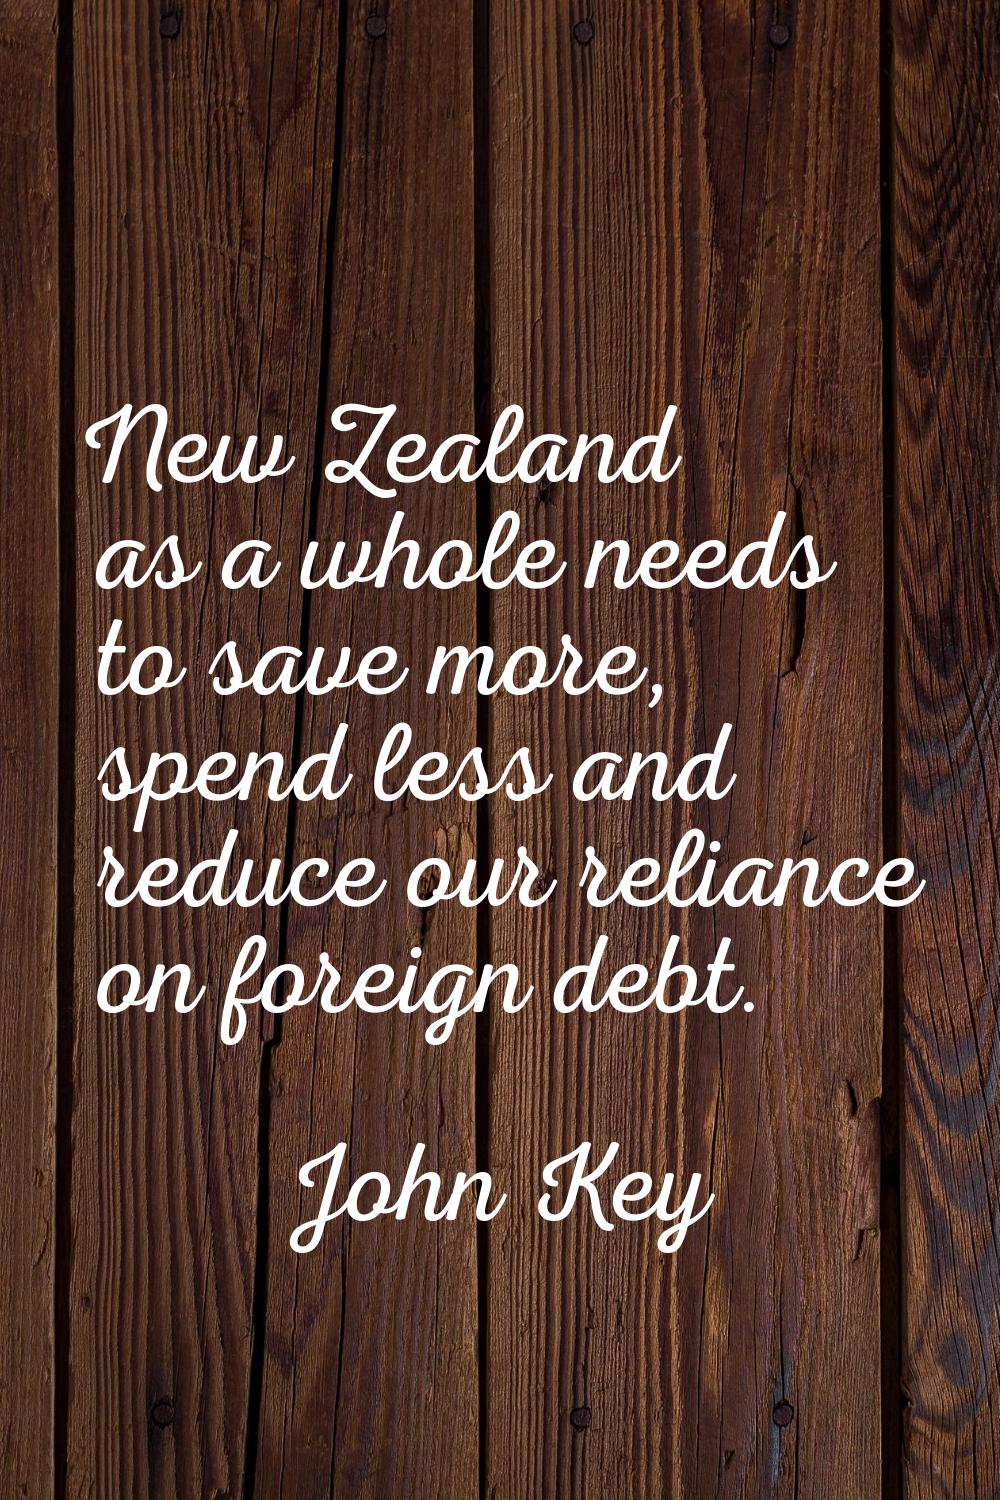 New Zealand as a whole needs to save more, spend less and reduce our reliance on foreign debt.